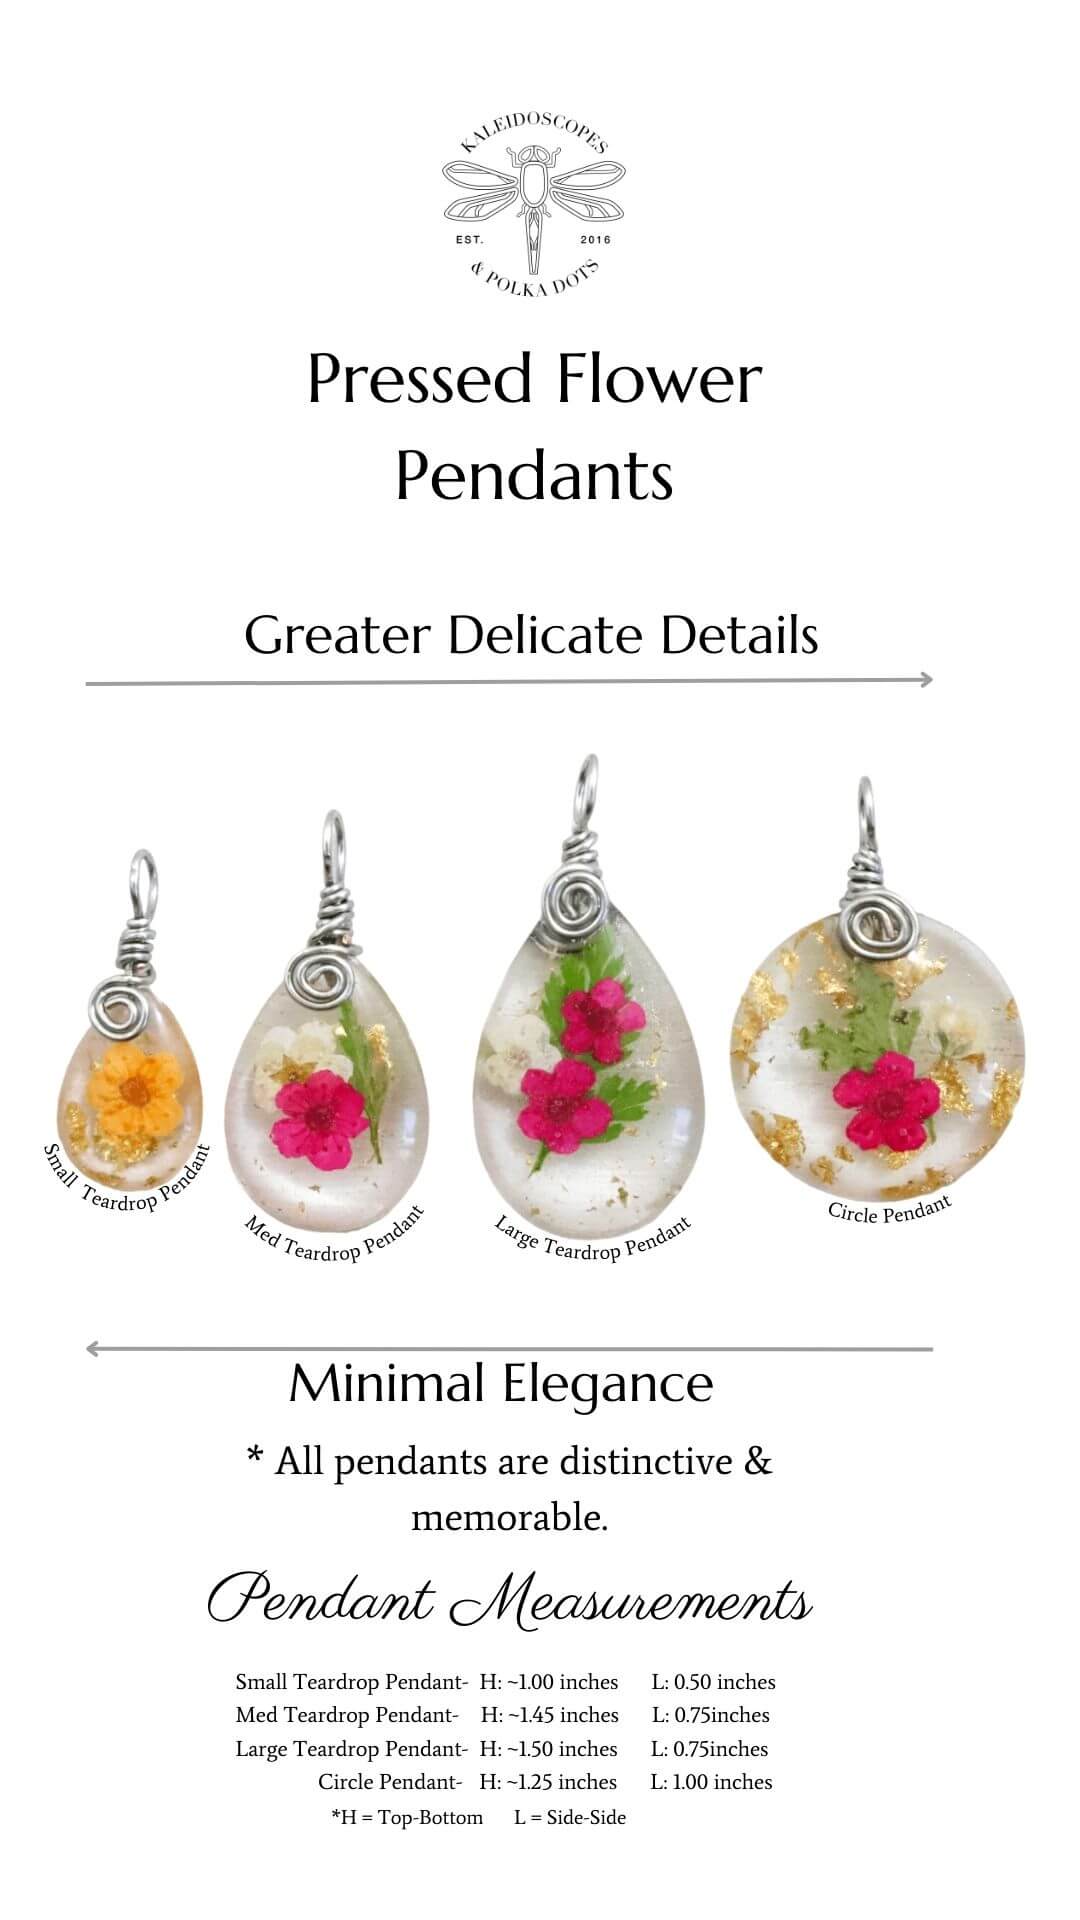 Pressed Flower Pendants by Kaleidoscopes And Polka Dots - What to expect given the size of each pendant. 